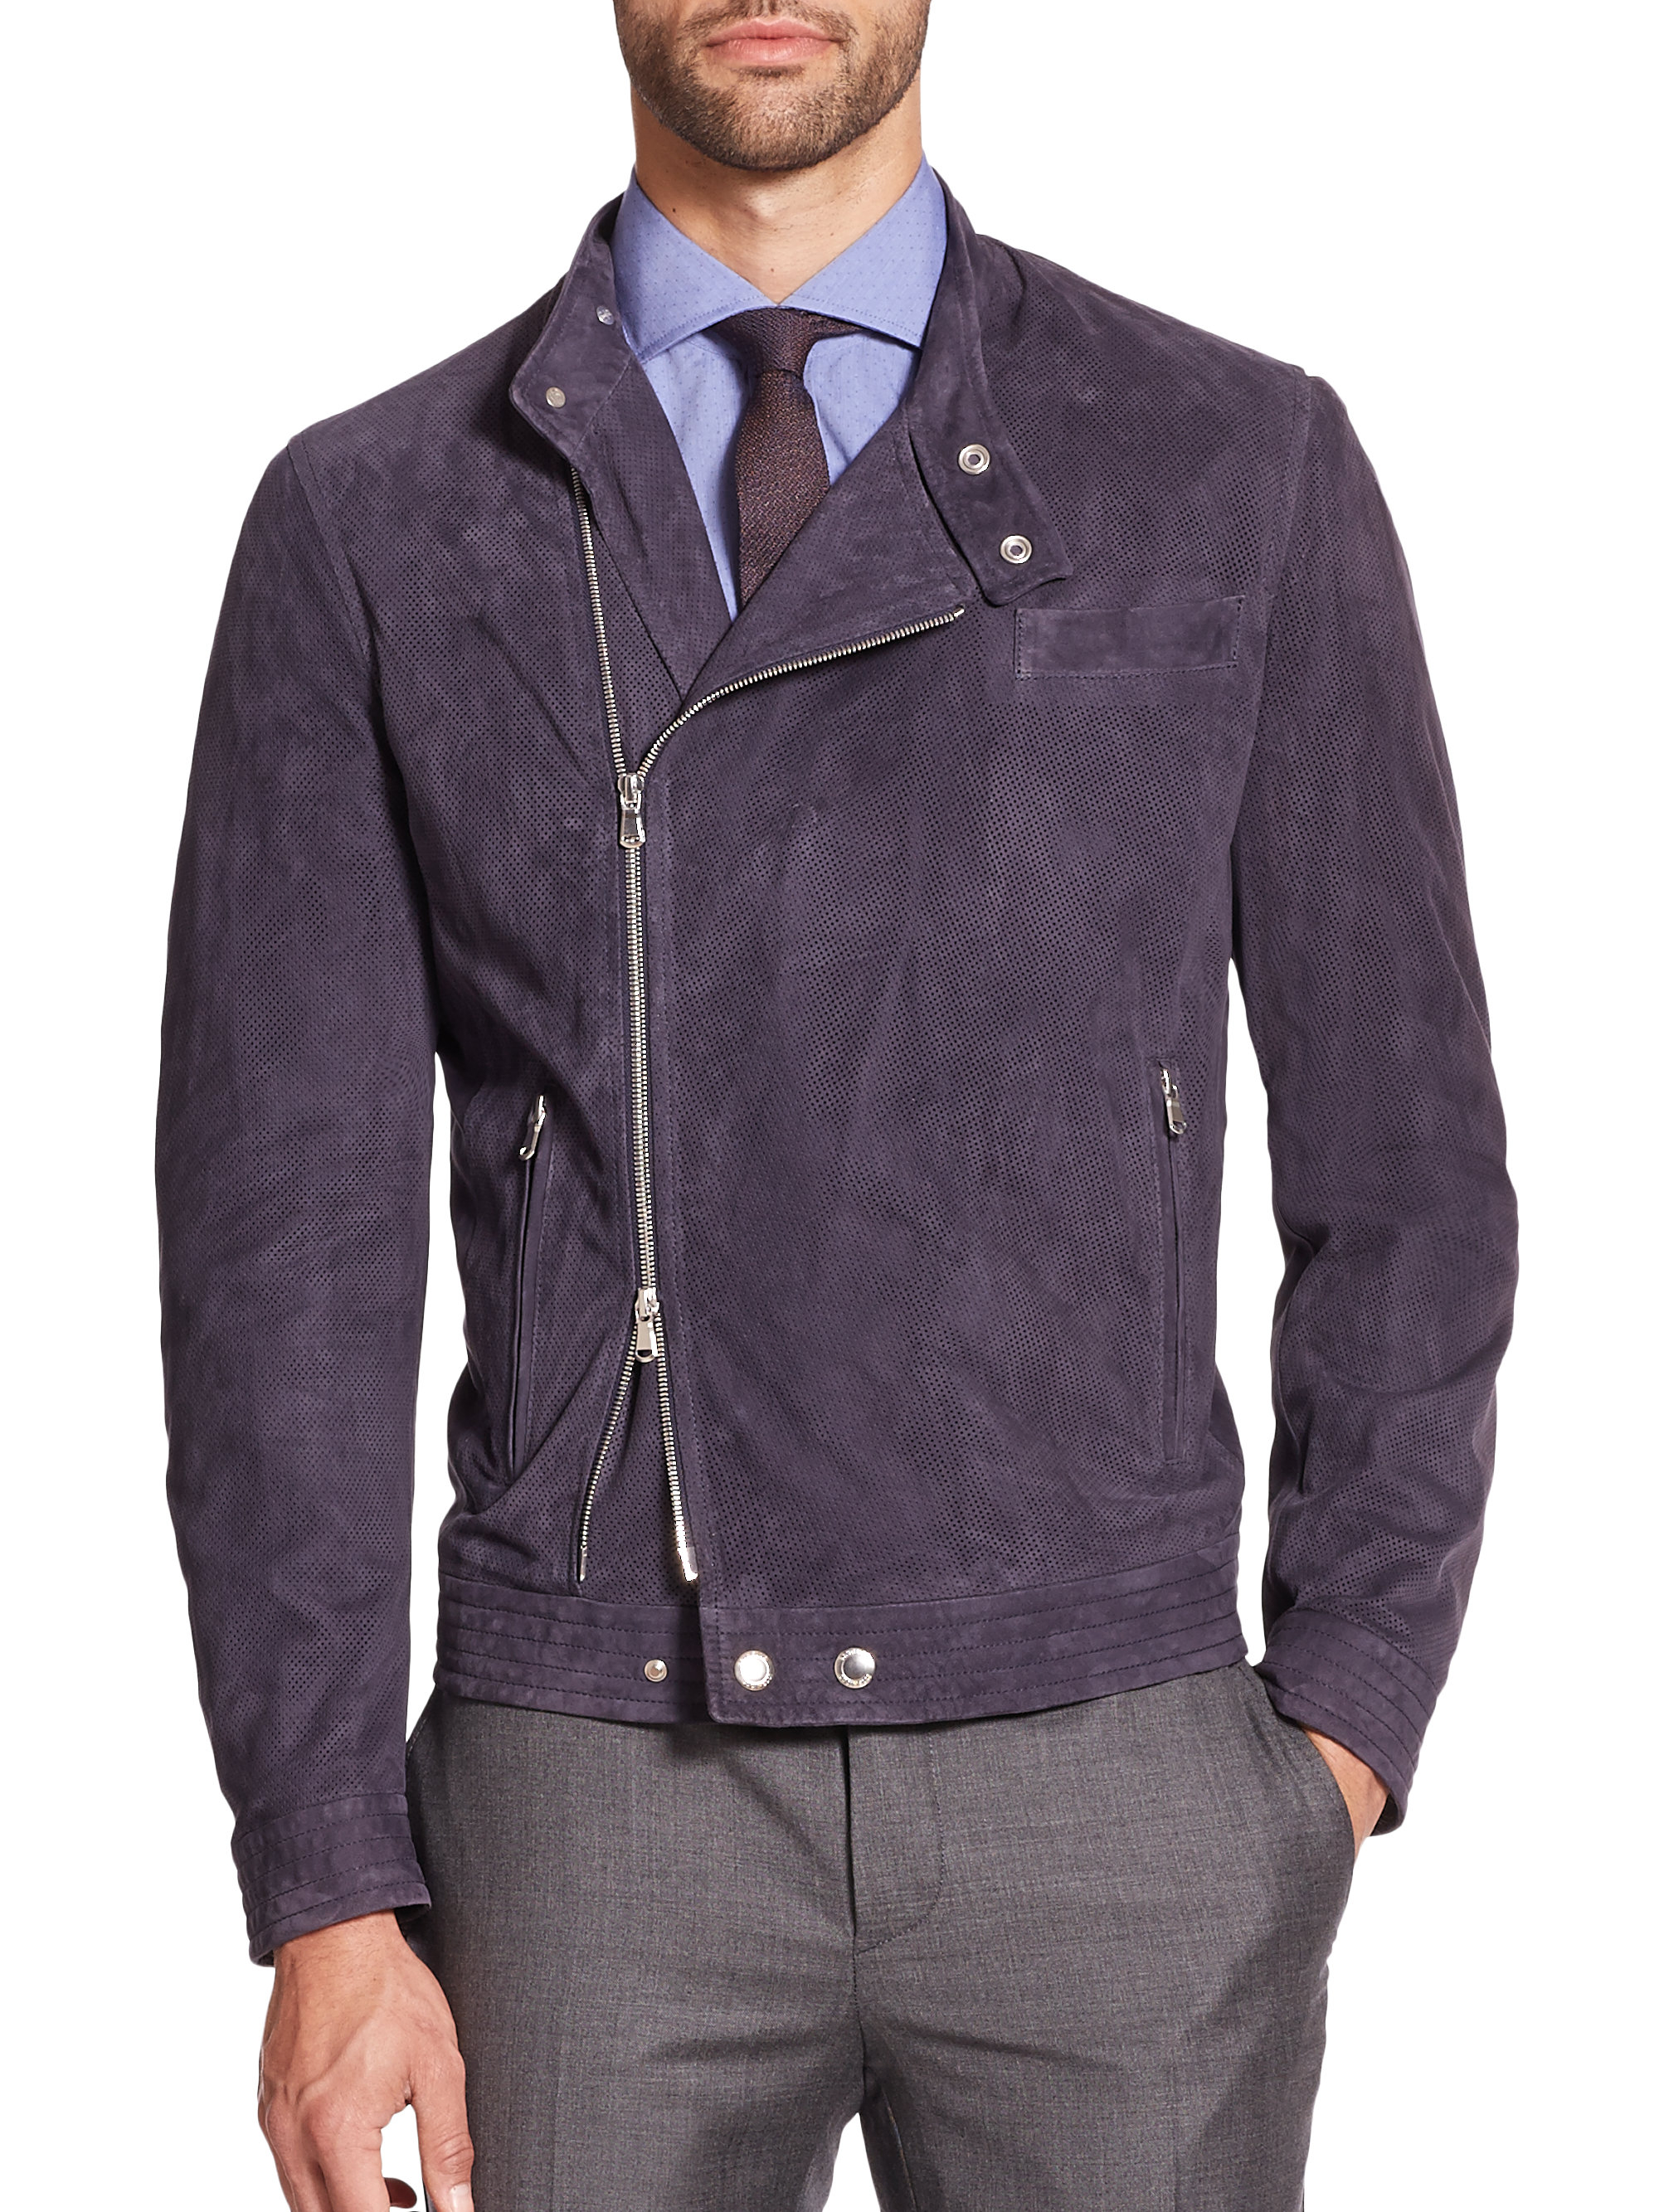 Lyst - Brunello cucinelli Perforated Suede Moto Jacket in Blue for Men